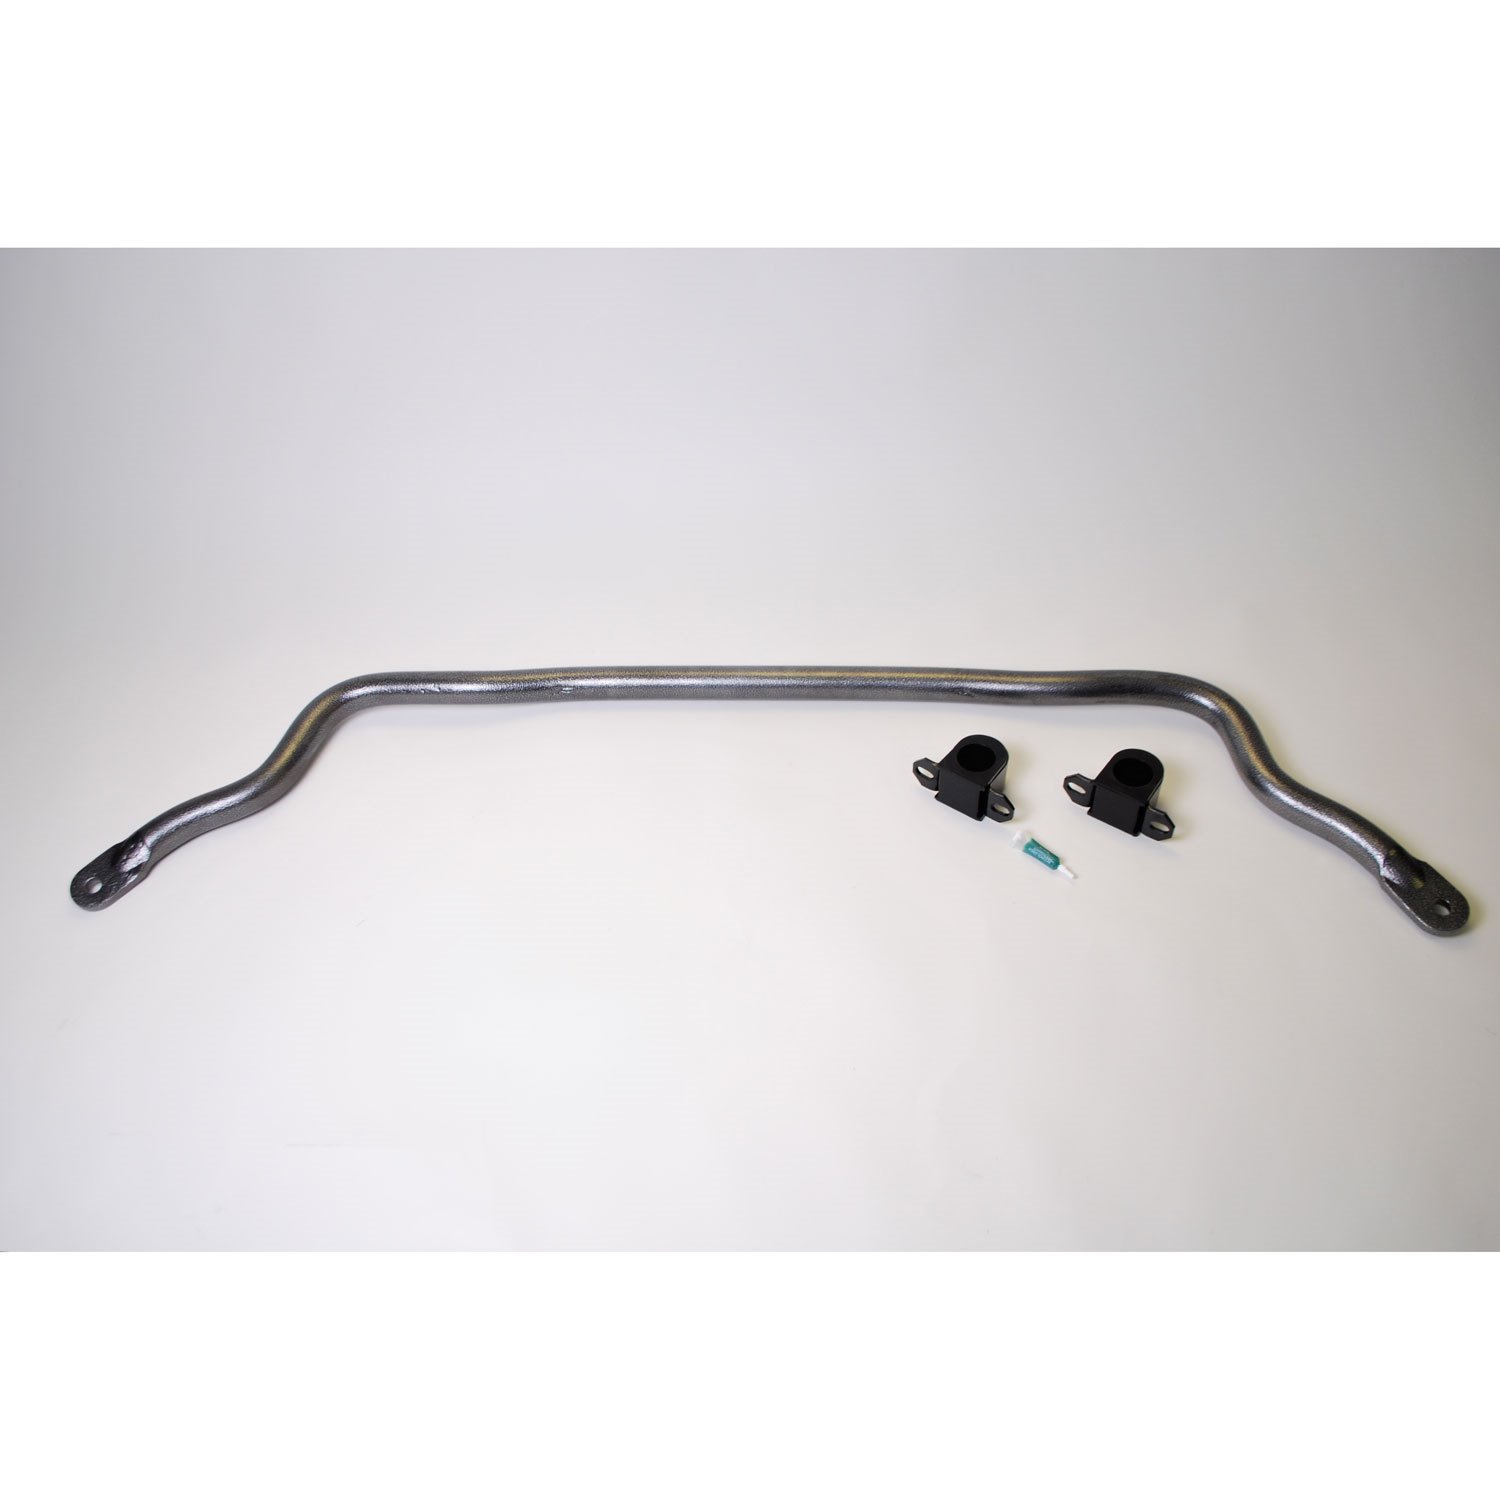 Front Sway Bar for 2009-2016 Dodge Ram 1500